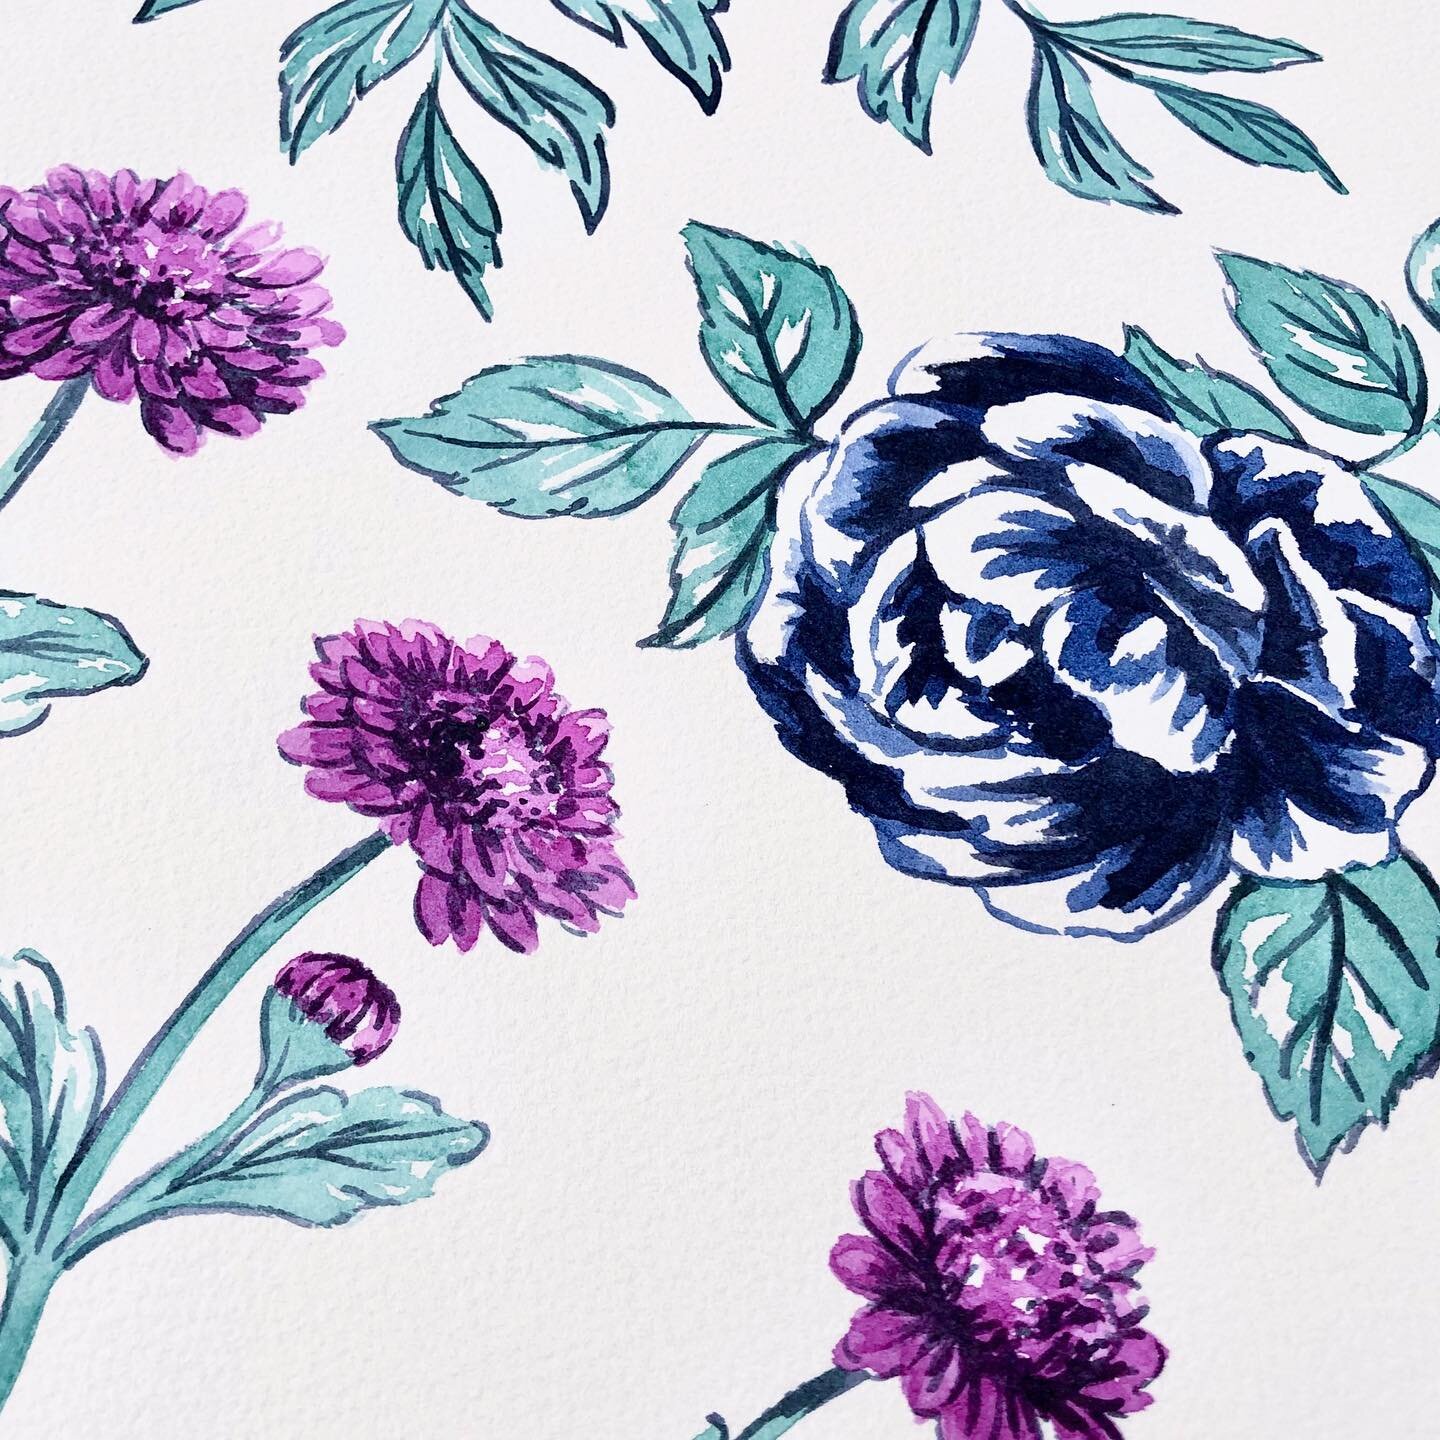 Day 85/100... Another blue rose and some little purple mums... #watercolorflowers #floralpainting #floralsketch #watercolor #watercolorfloral #winsorandnewton #everydaywatercolor #princetonbrushes #flower #floralart #flowerdrawing #floral #floraldraw